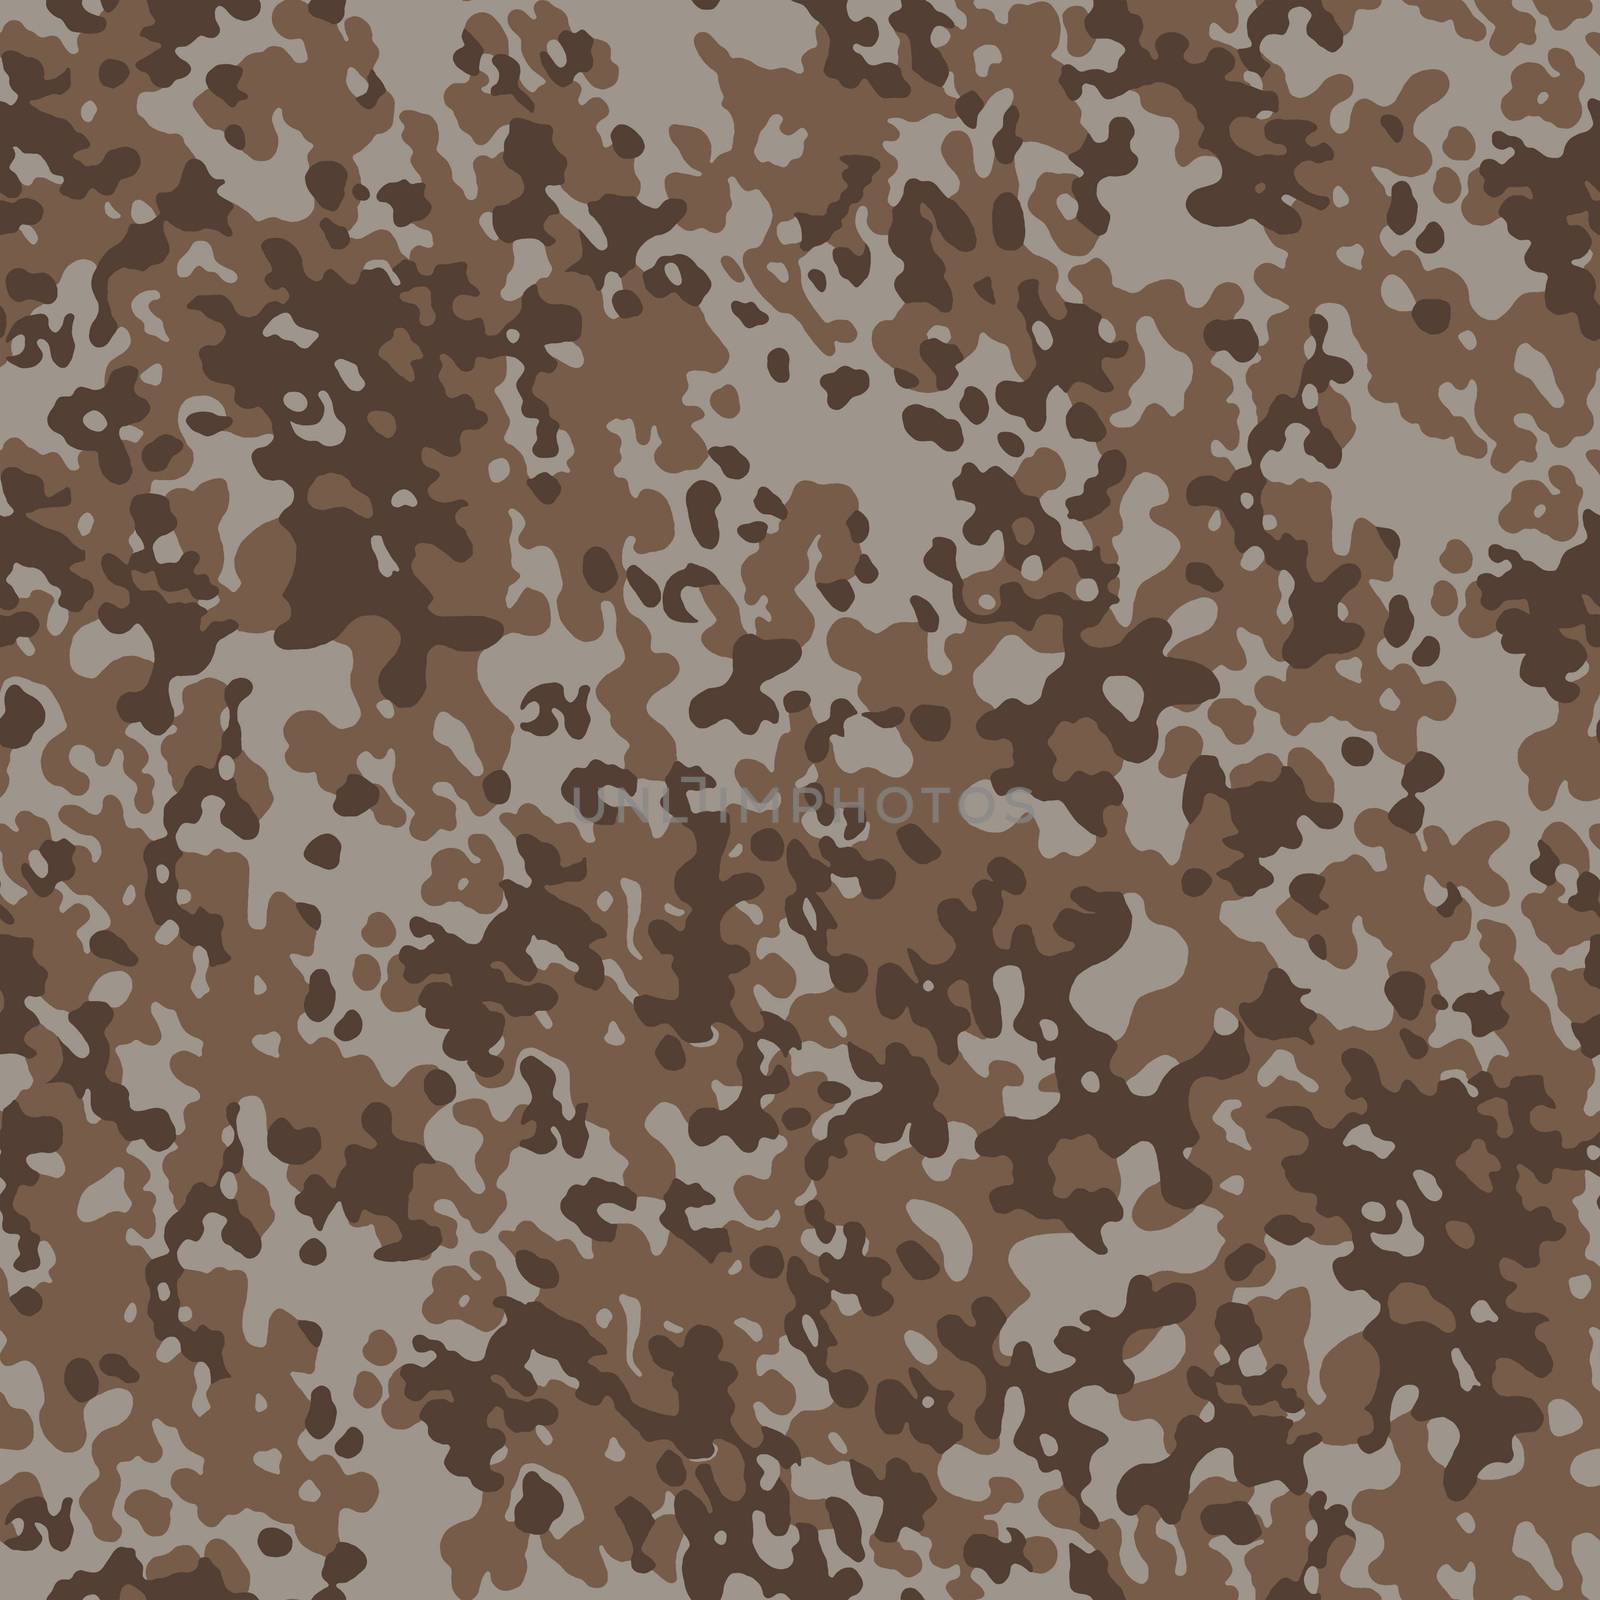 Army camouflage pattern in brown.Texture or background